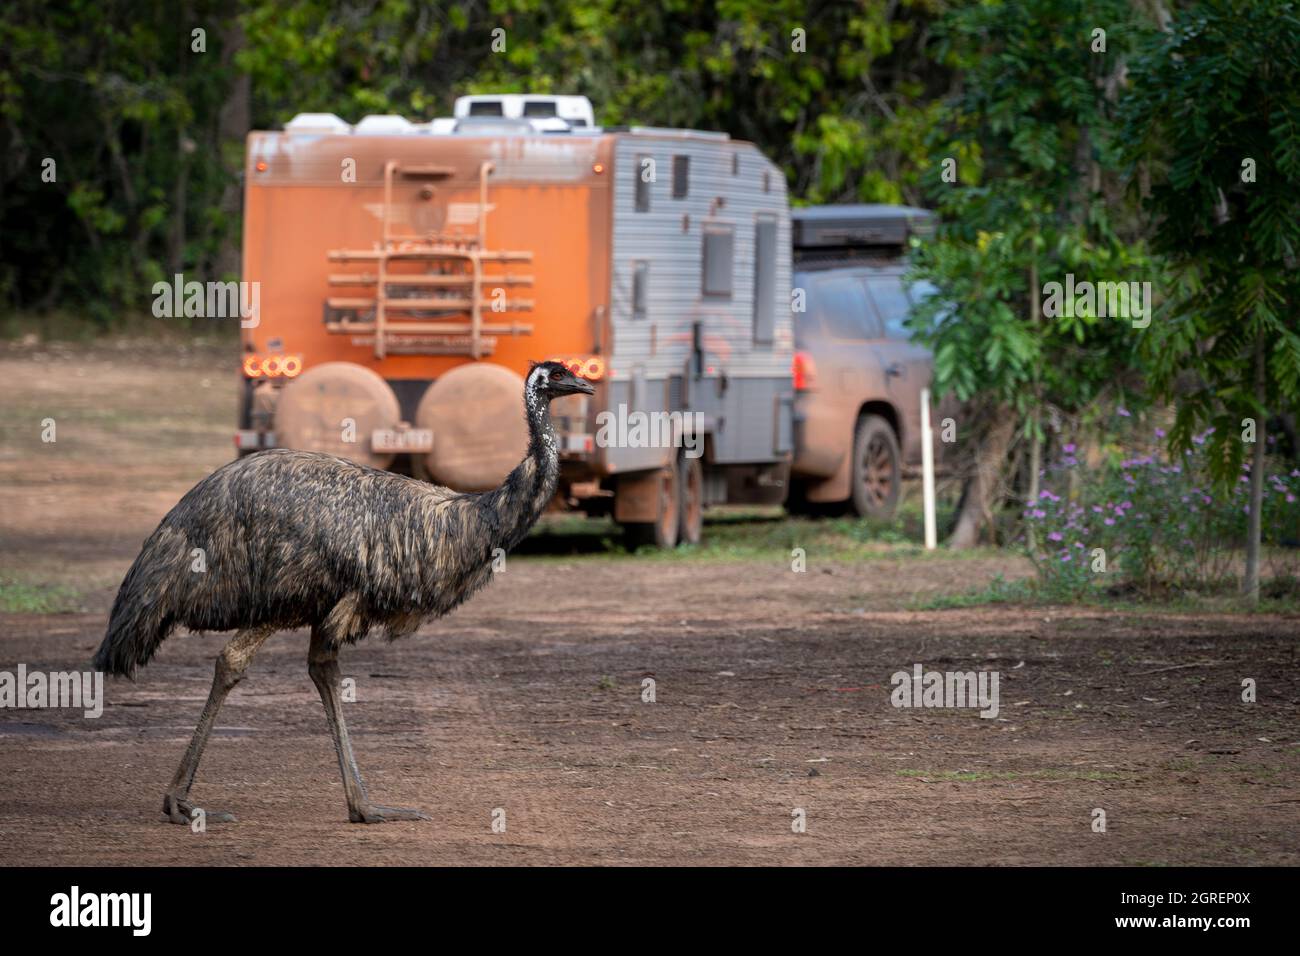 Emu walking through campground at Hann River Roadhouse, Cape York Peninsula, North Queensland Stock Photo